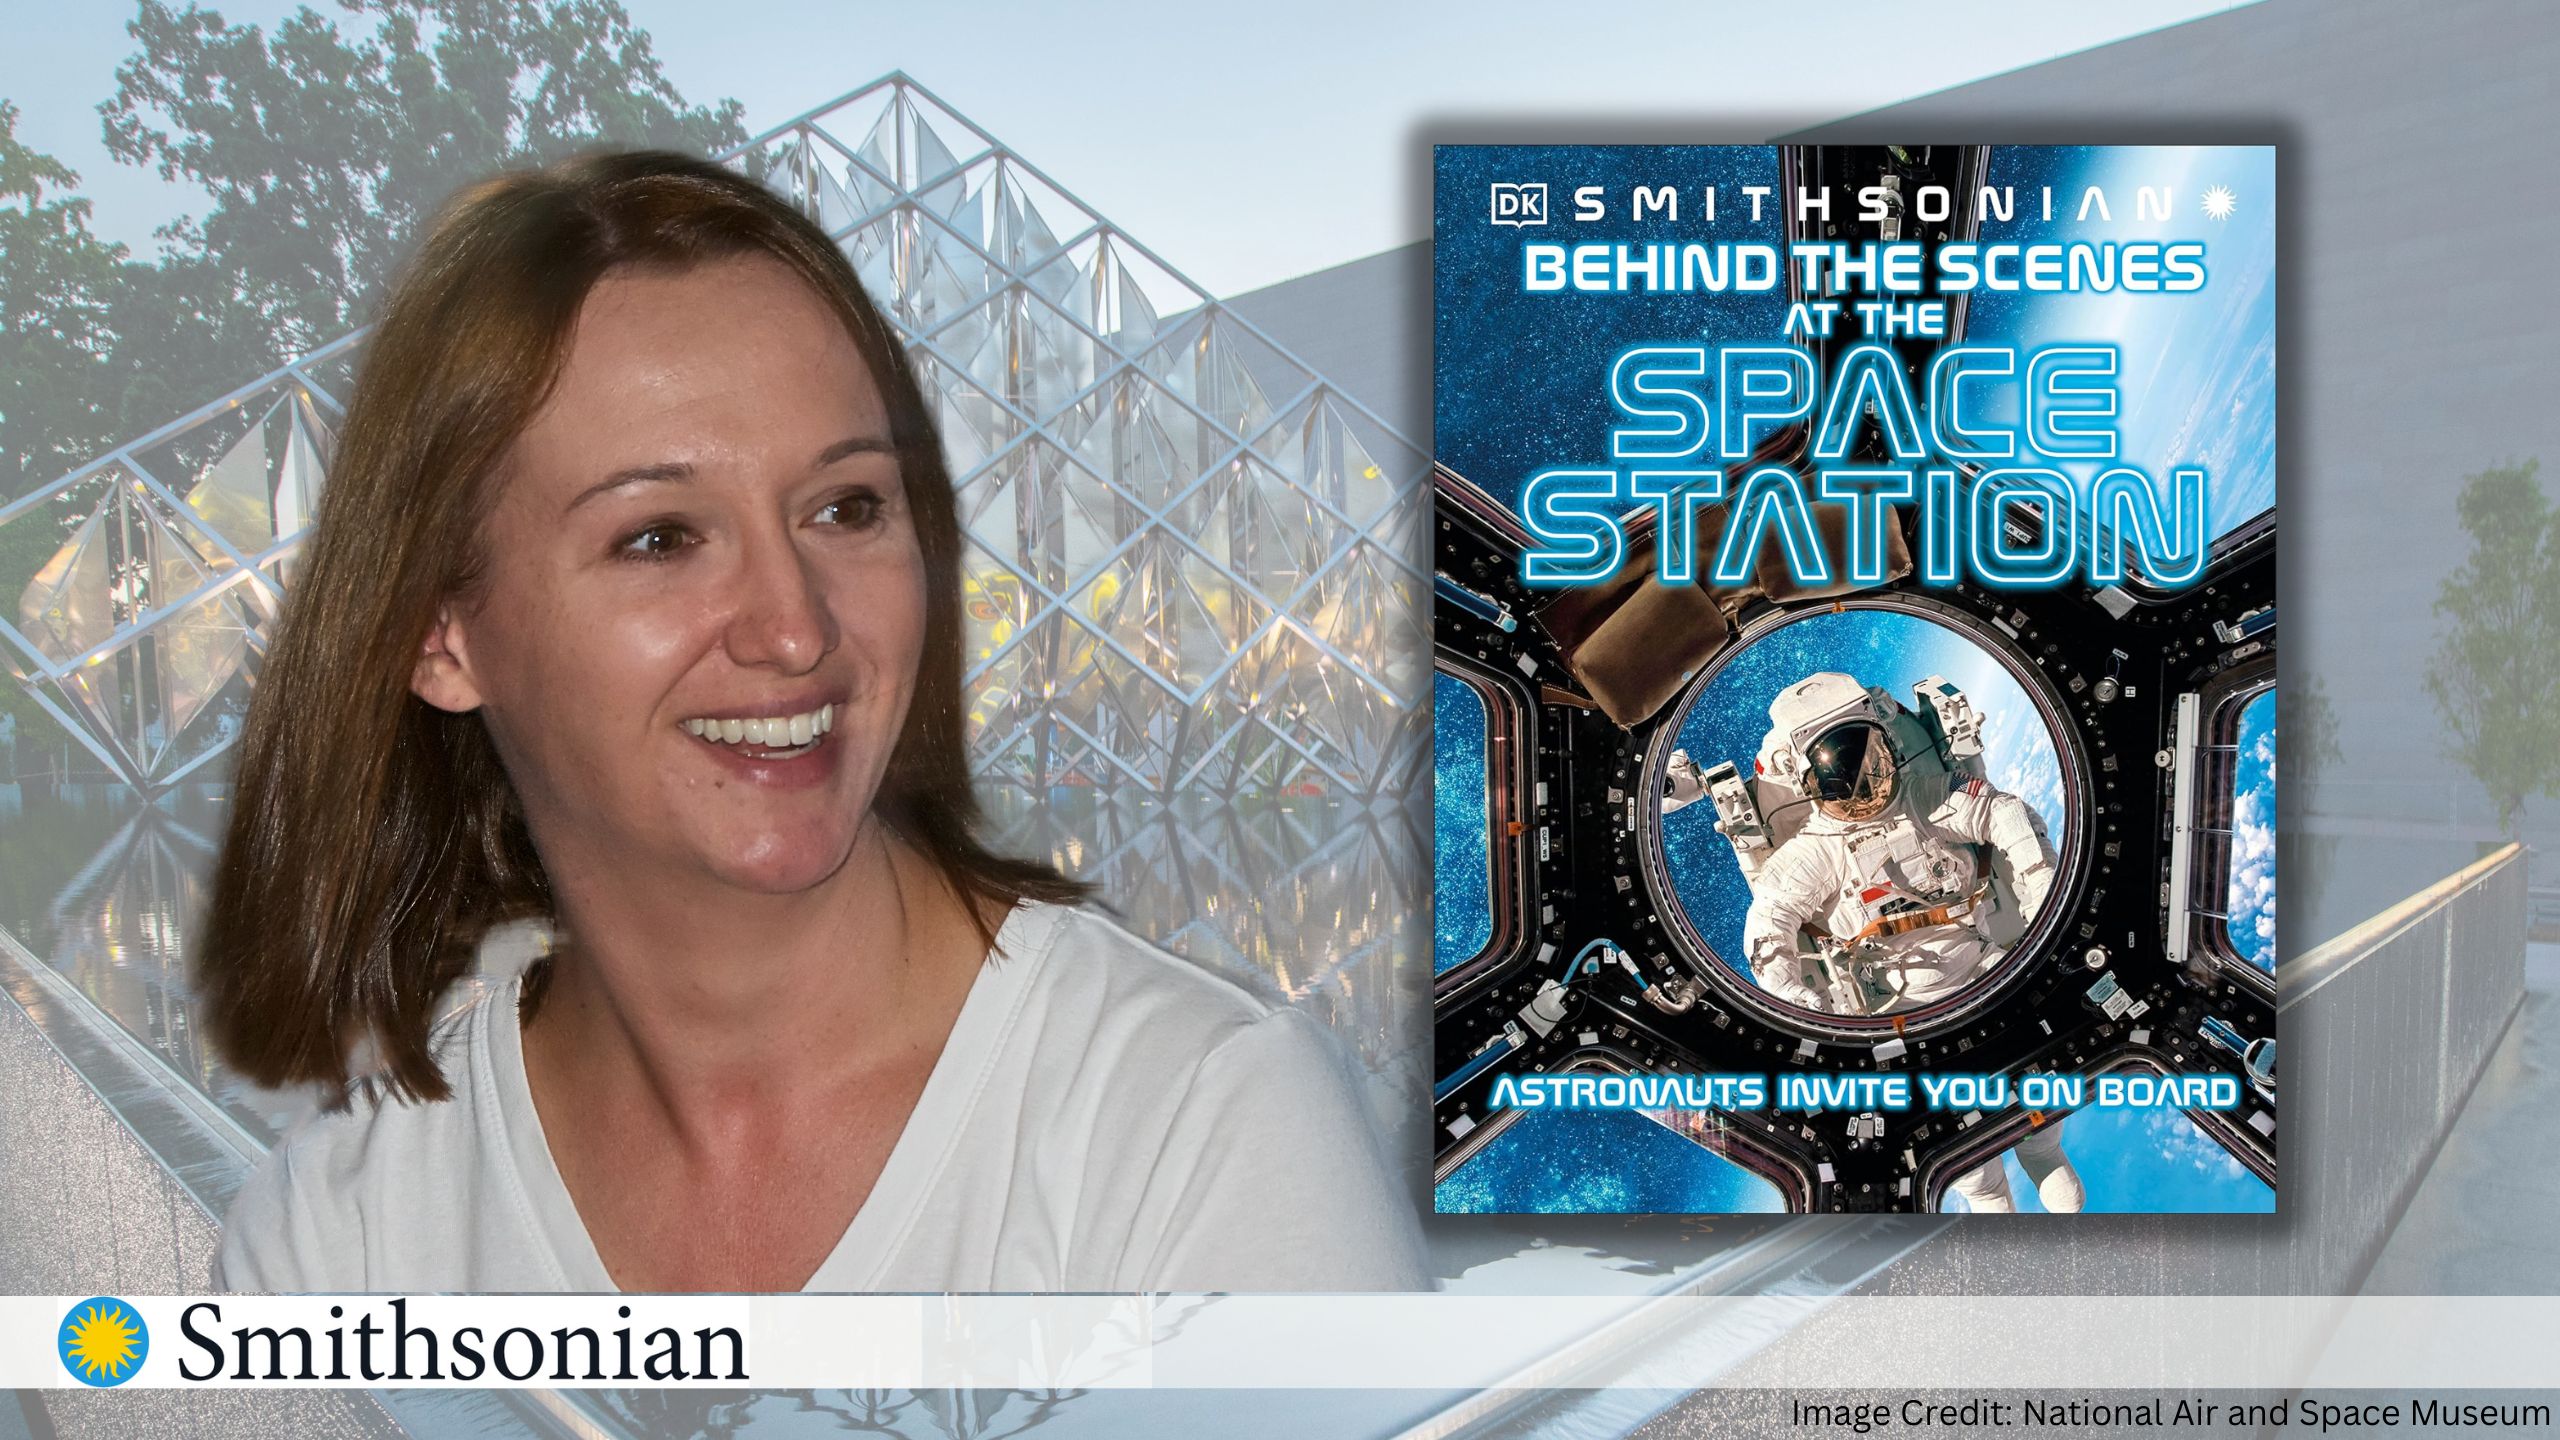 Image of Smithsonian Curator Dr. Jennifer Levasseur and an image of the cover of the book Smithsonian Behind the Scenes at the Space Station